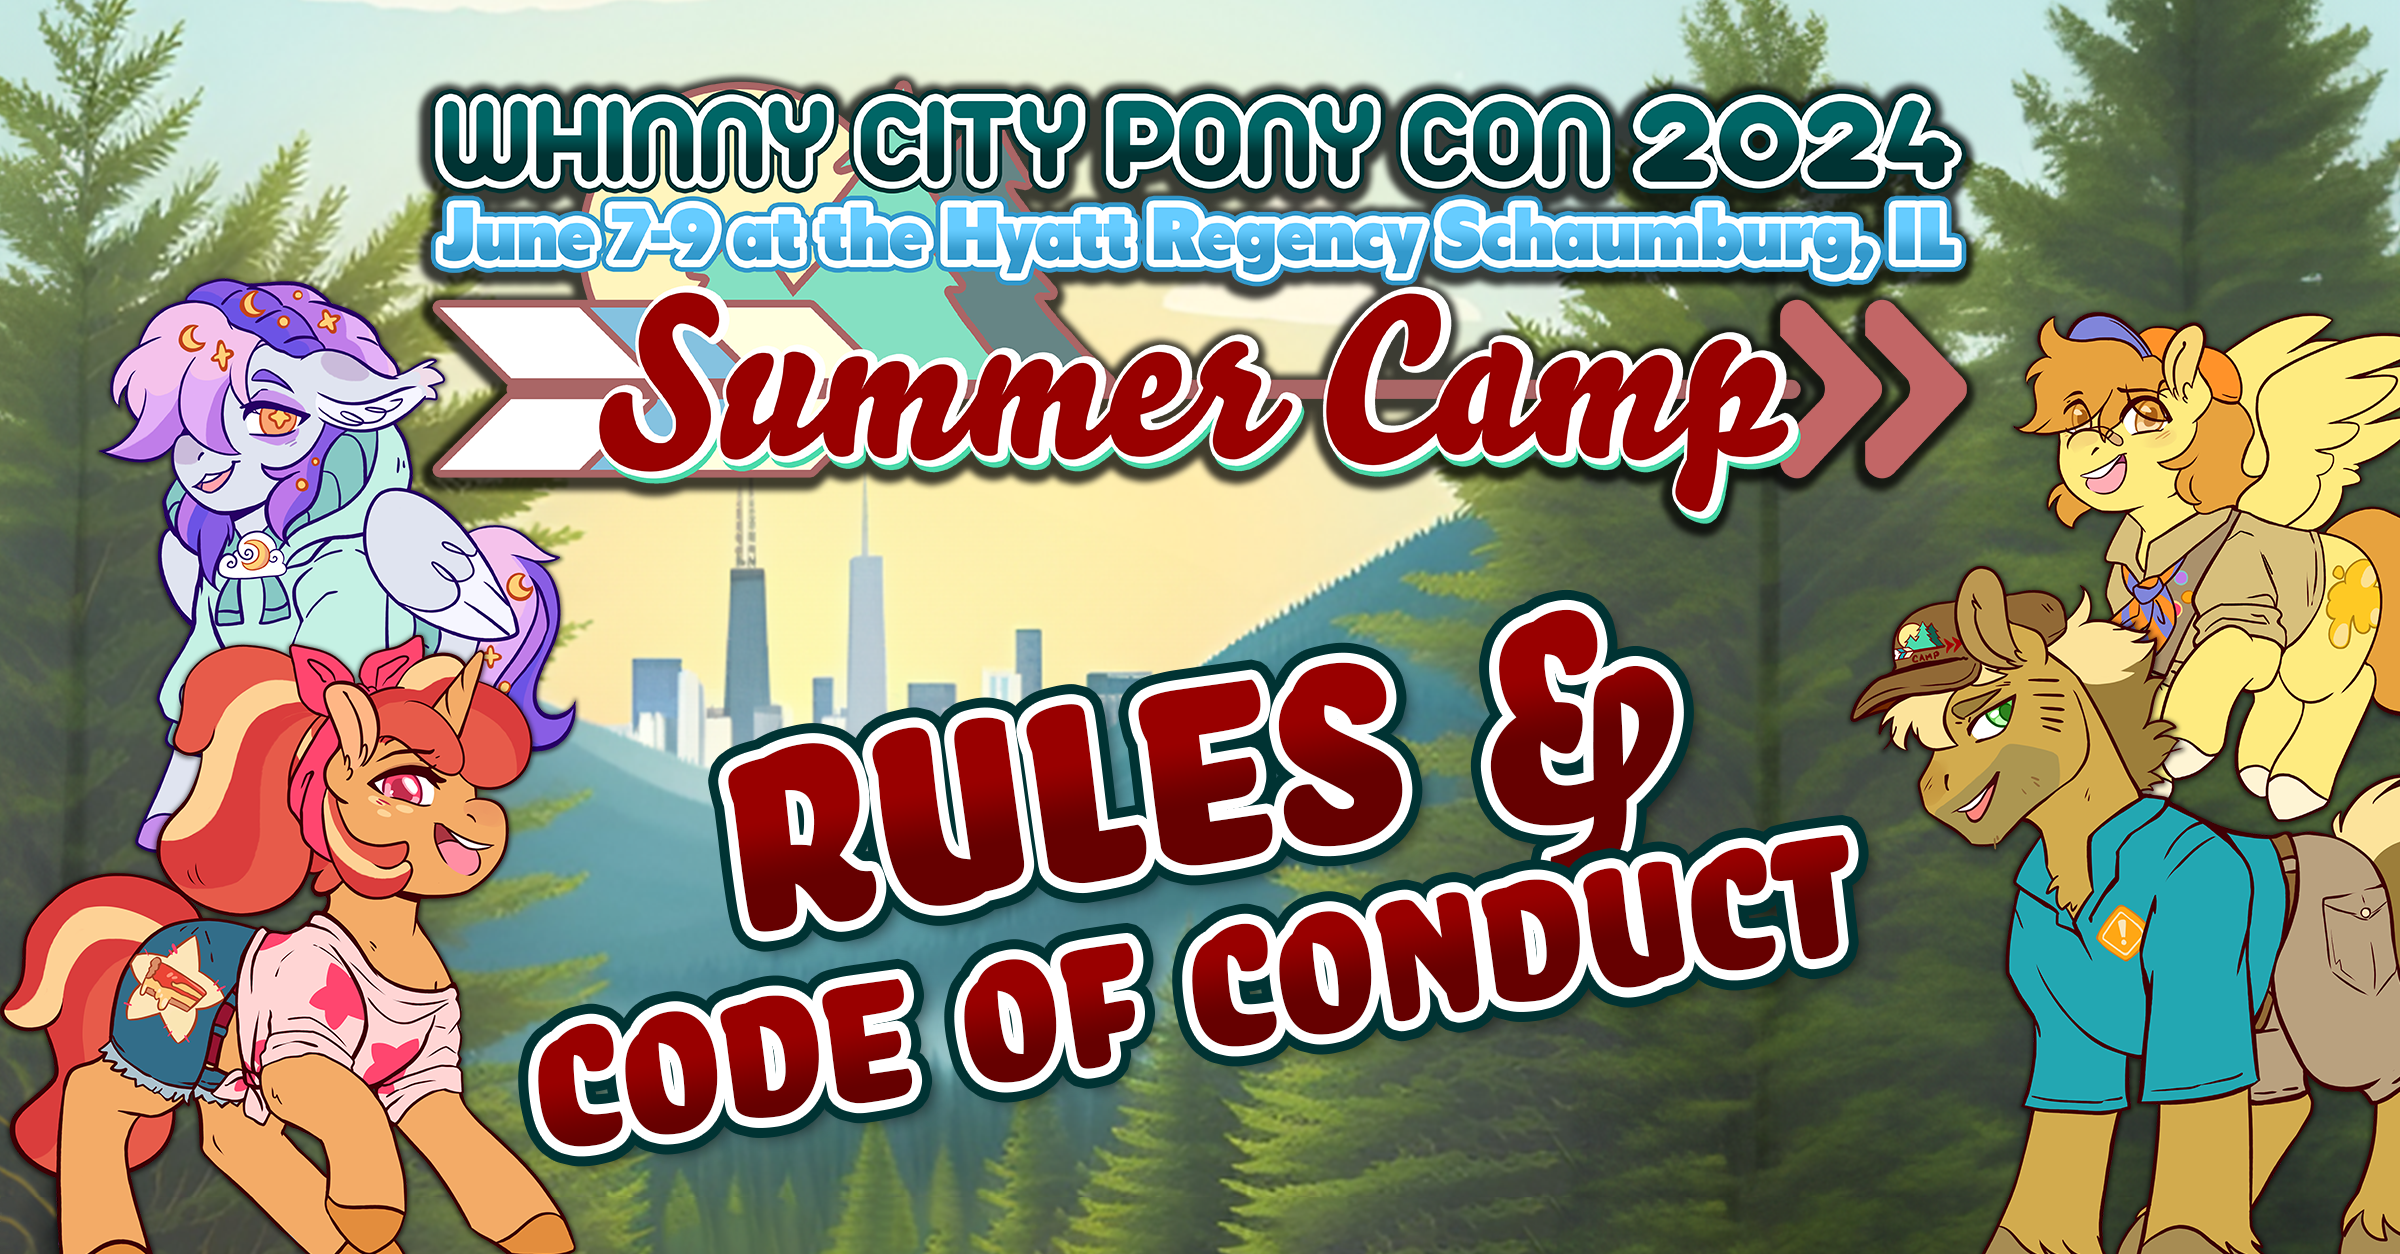 Rules & Code of Conduct